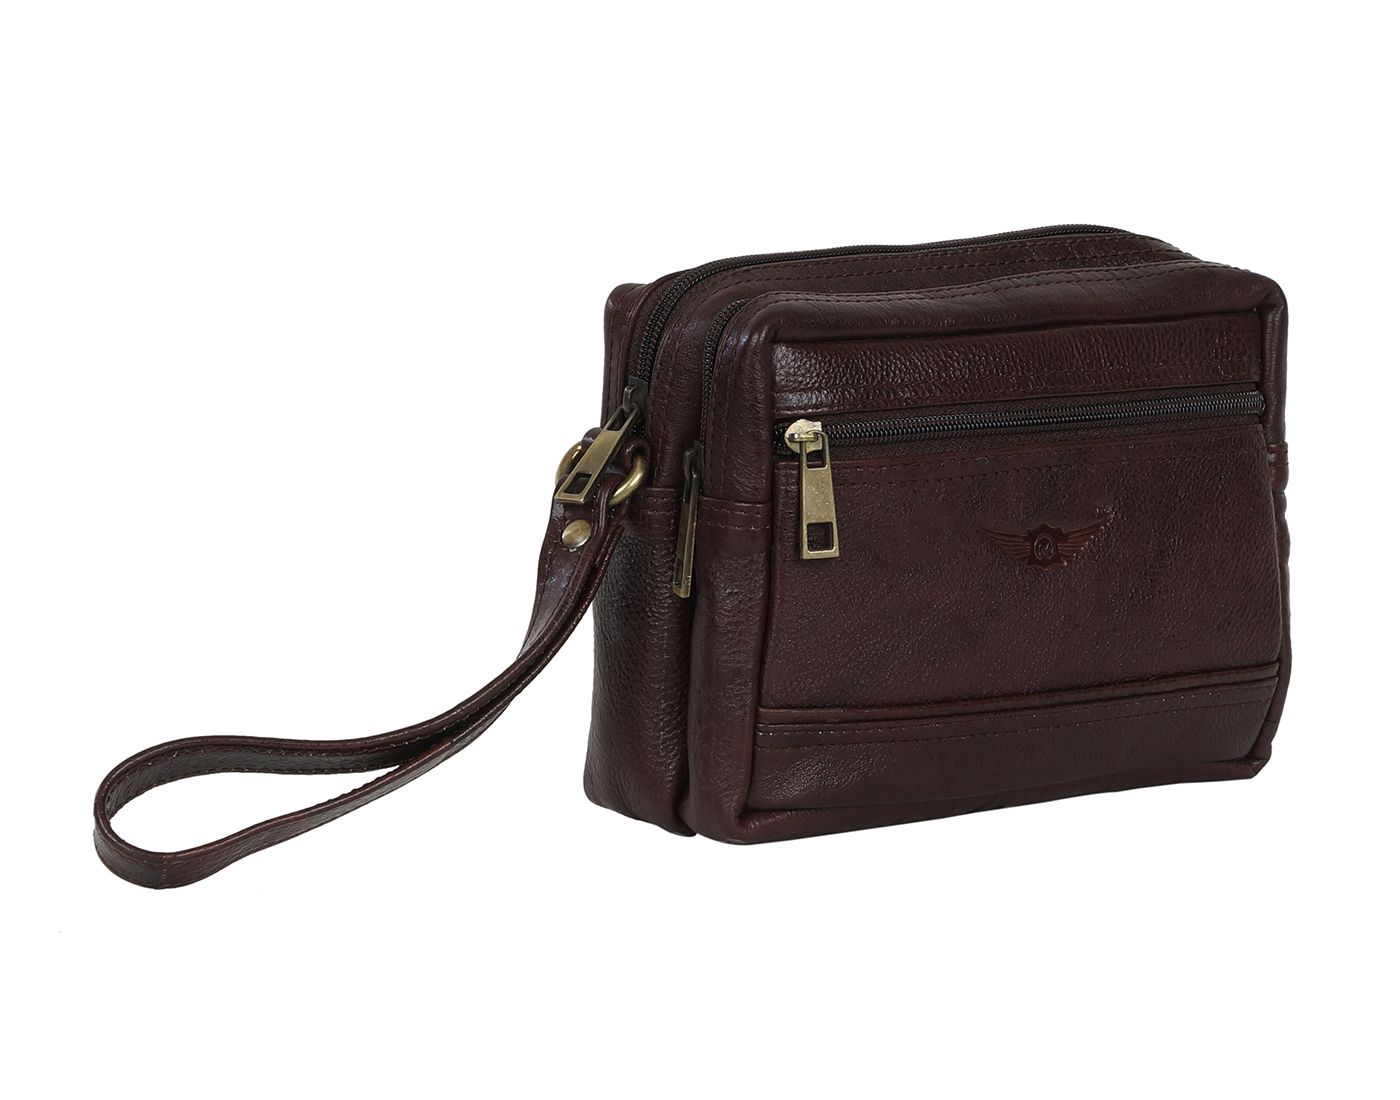 Maskino Leather Brown Pouch - Buy Maskino Leather Brown Pouch Online at ...